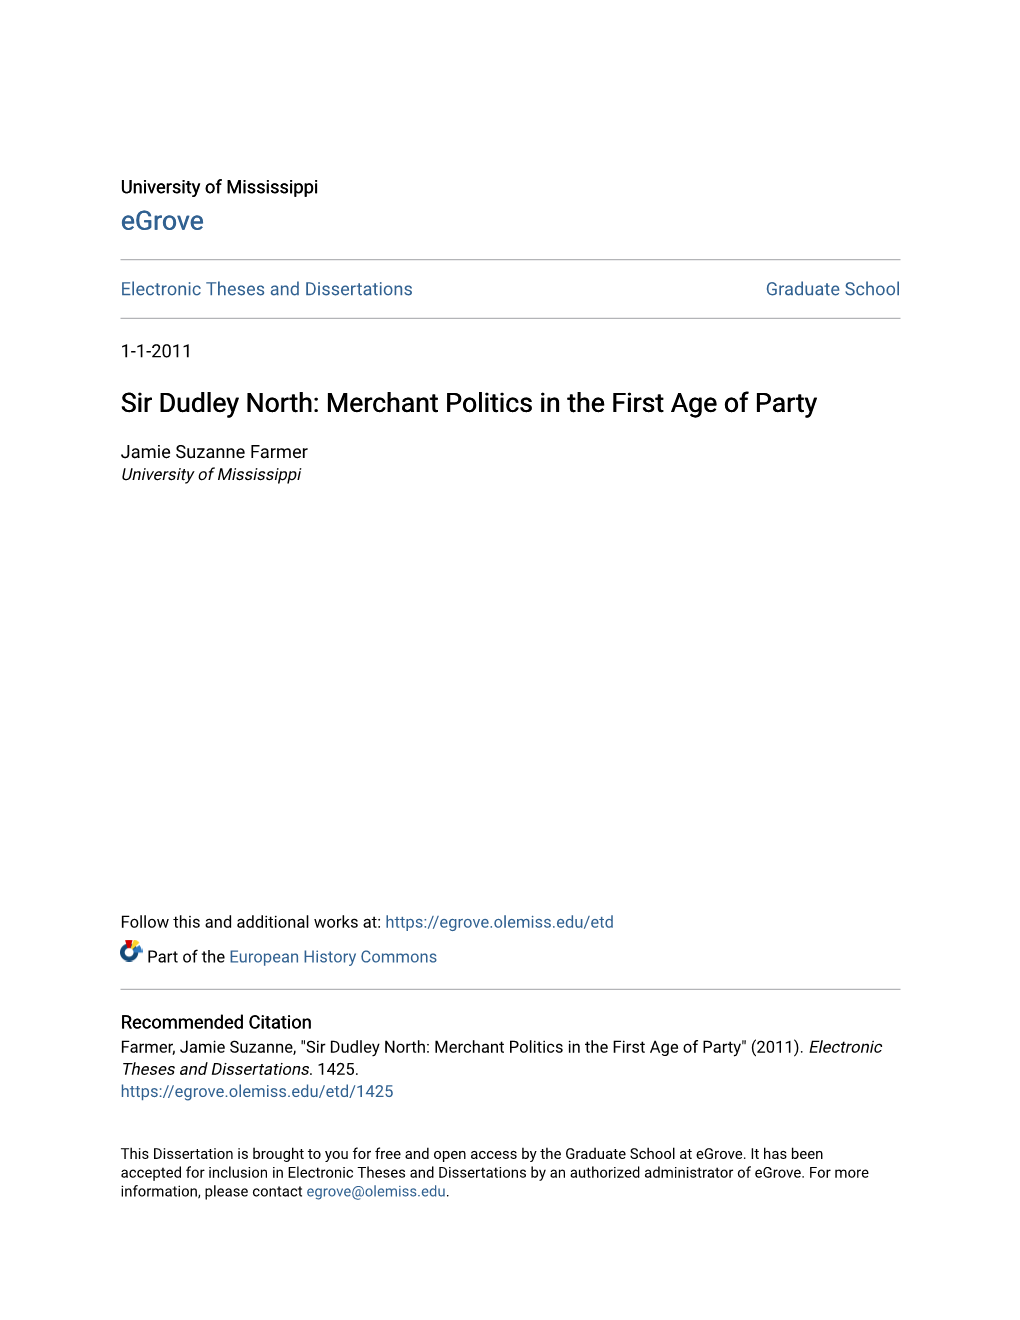 Sir Dudley North: Merchant Politics in the First Age of Party